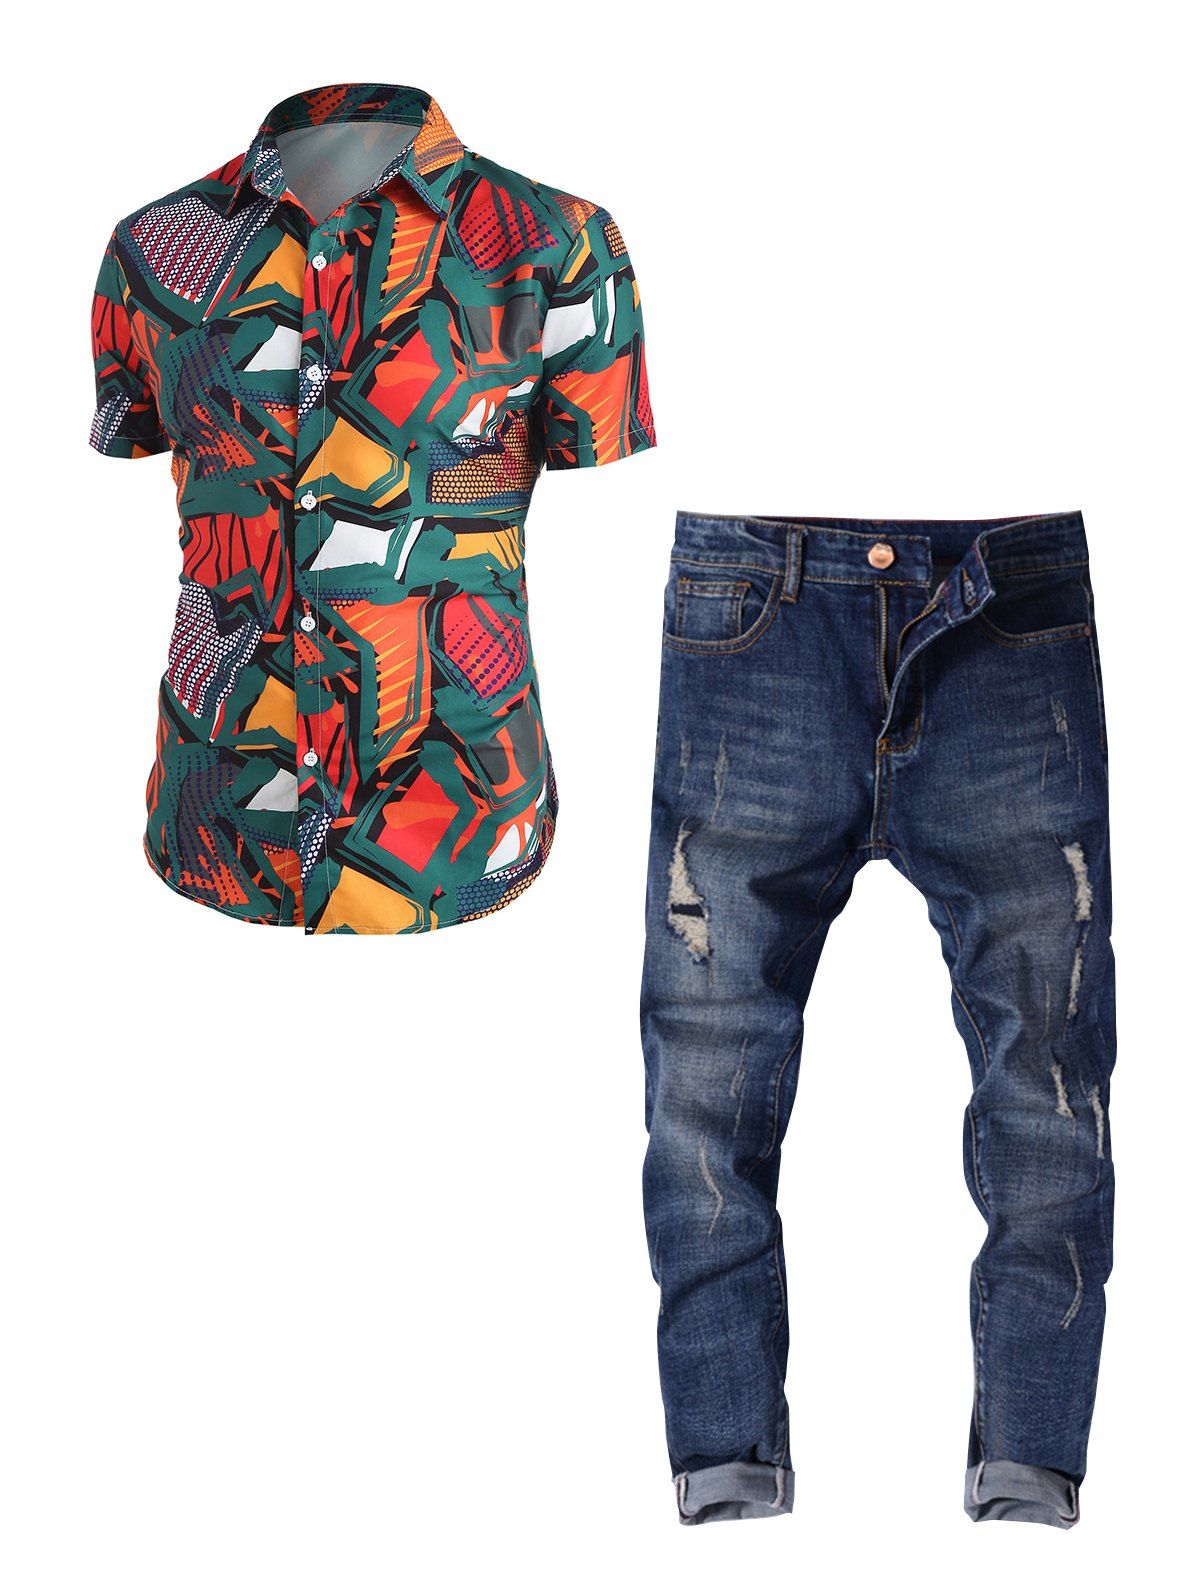 Geometric Pattern Short Sleeves Button Up Shirt and Distressed Scratches Straight Ripped Jeans Casual Outfit - multicolor M